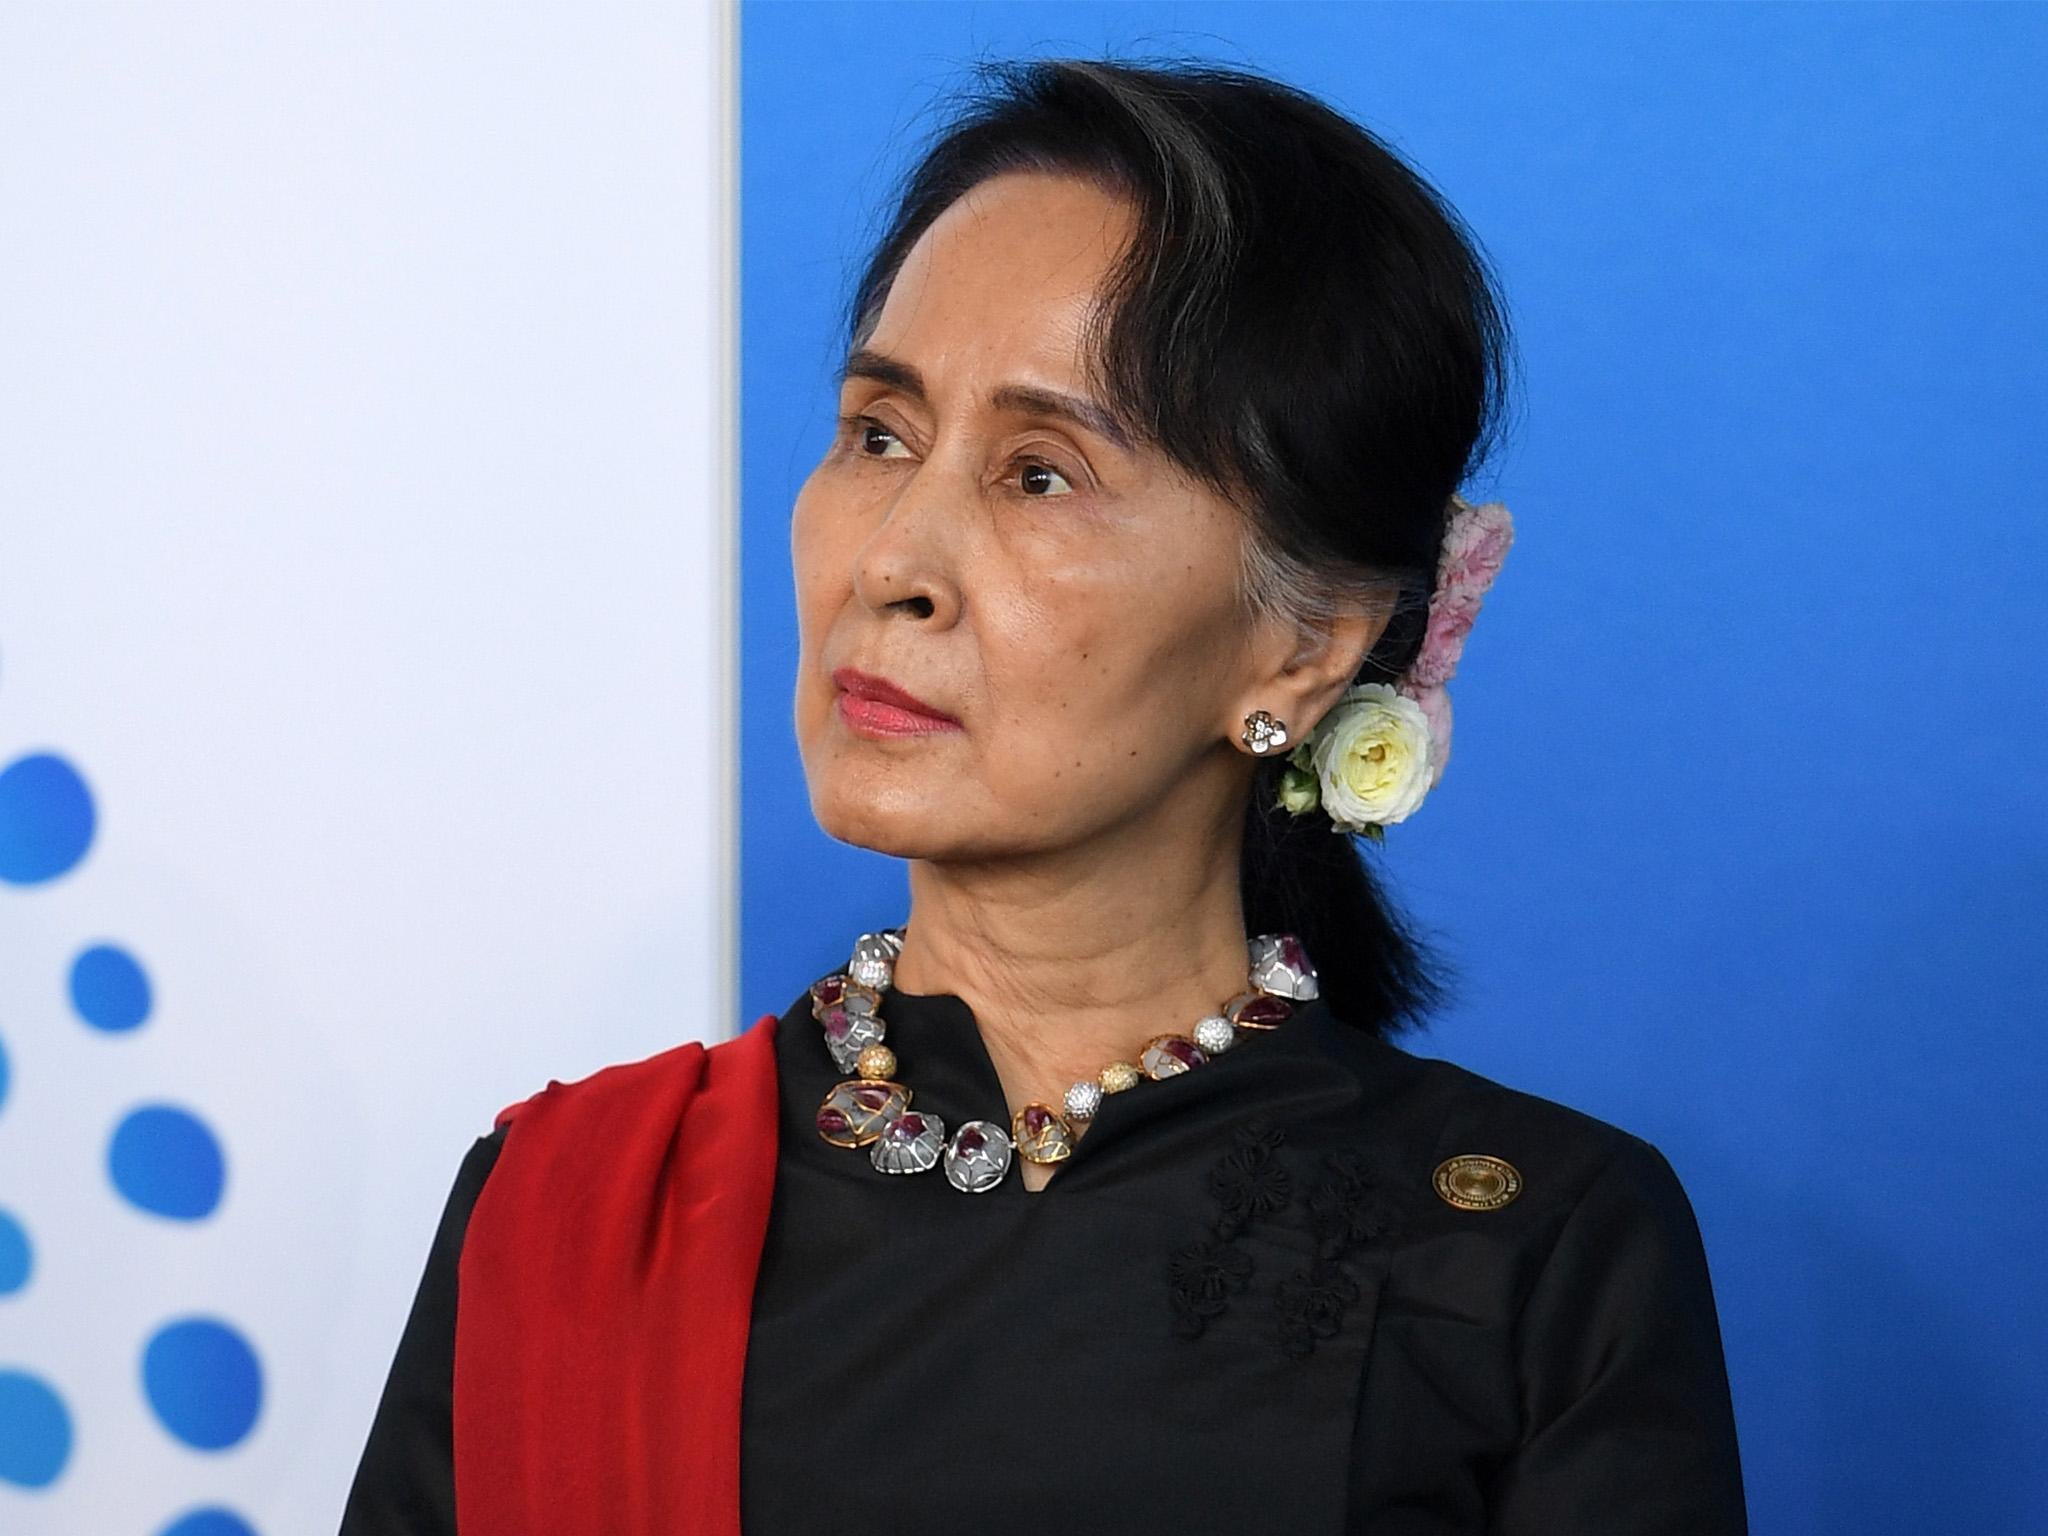 Burmese State Counsellor Aung San Suu Kyi studied at Oxford and SOAS